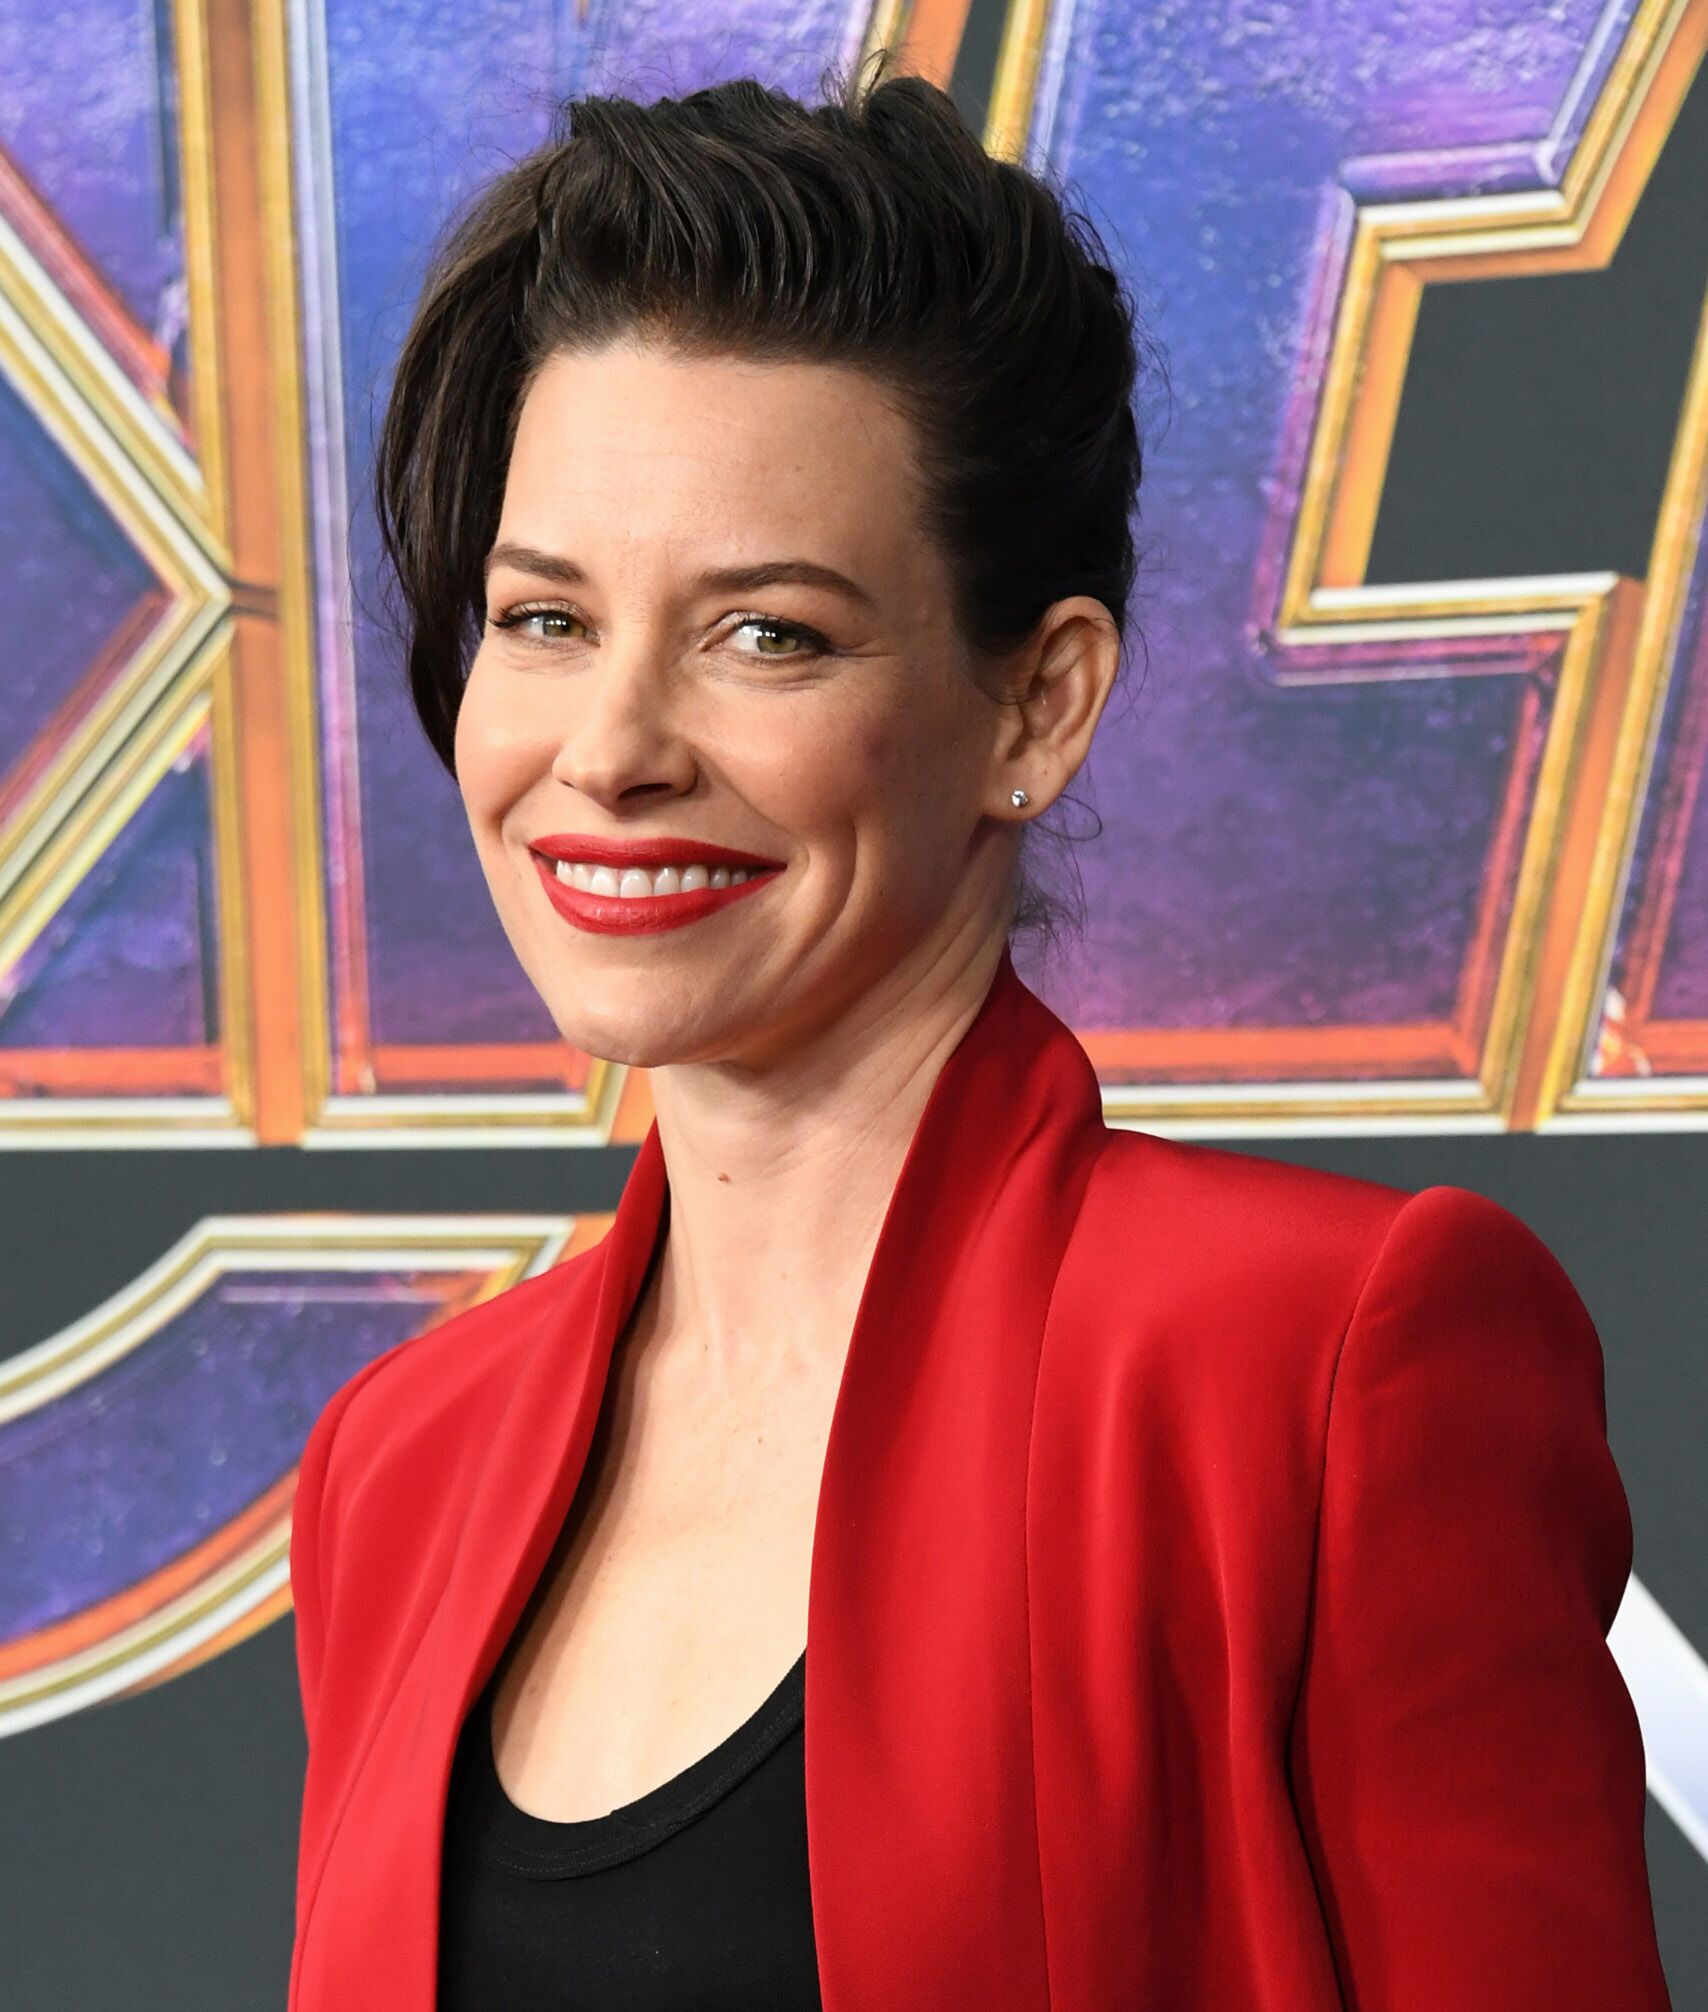 Evangeline Lilly at the world premiere of "Avengers: Endgame" at the Los Angeles Convention Center on April 22, 2019, in California | Photo: Jon Kopaloff/Getty Images